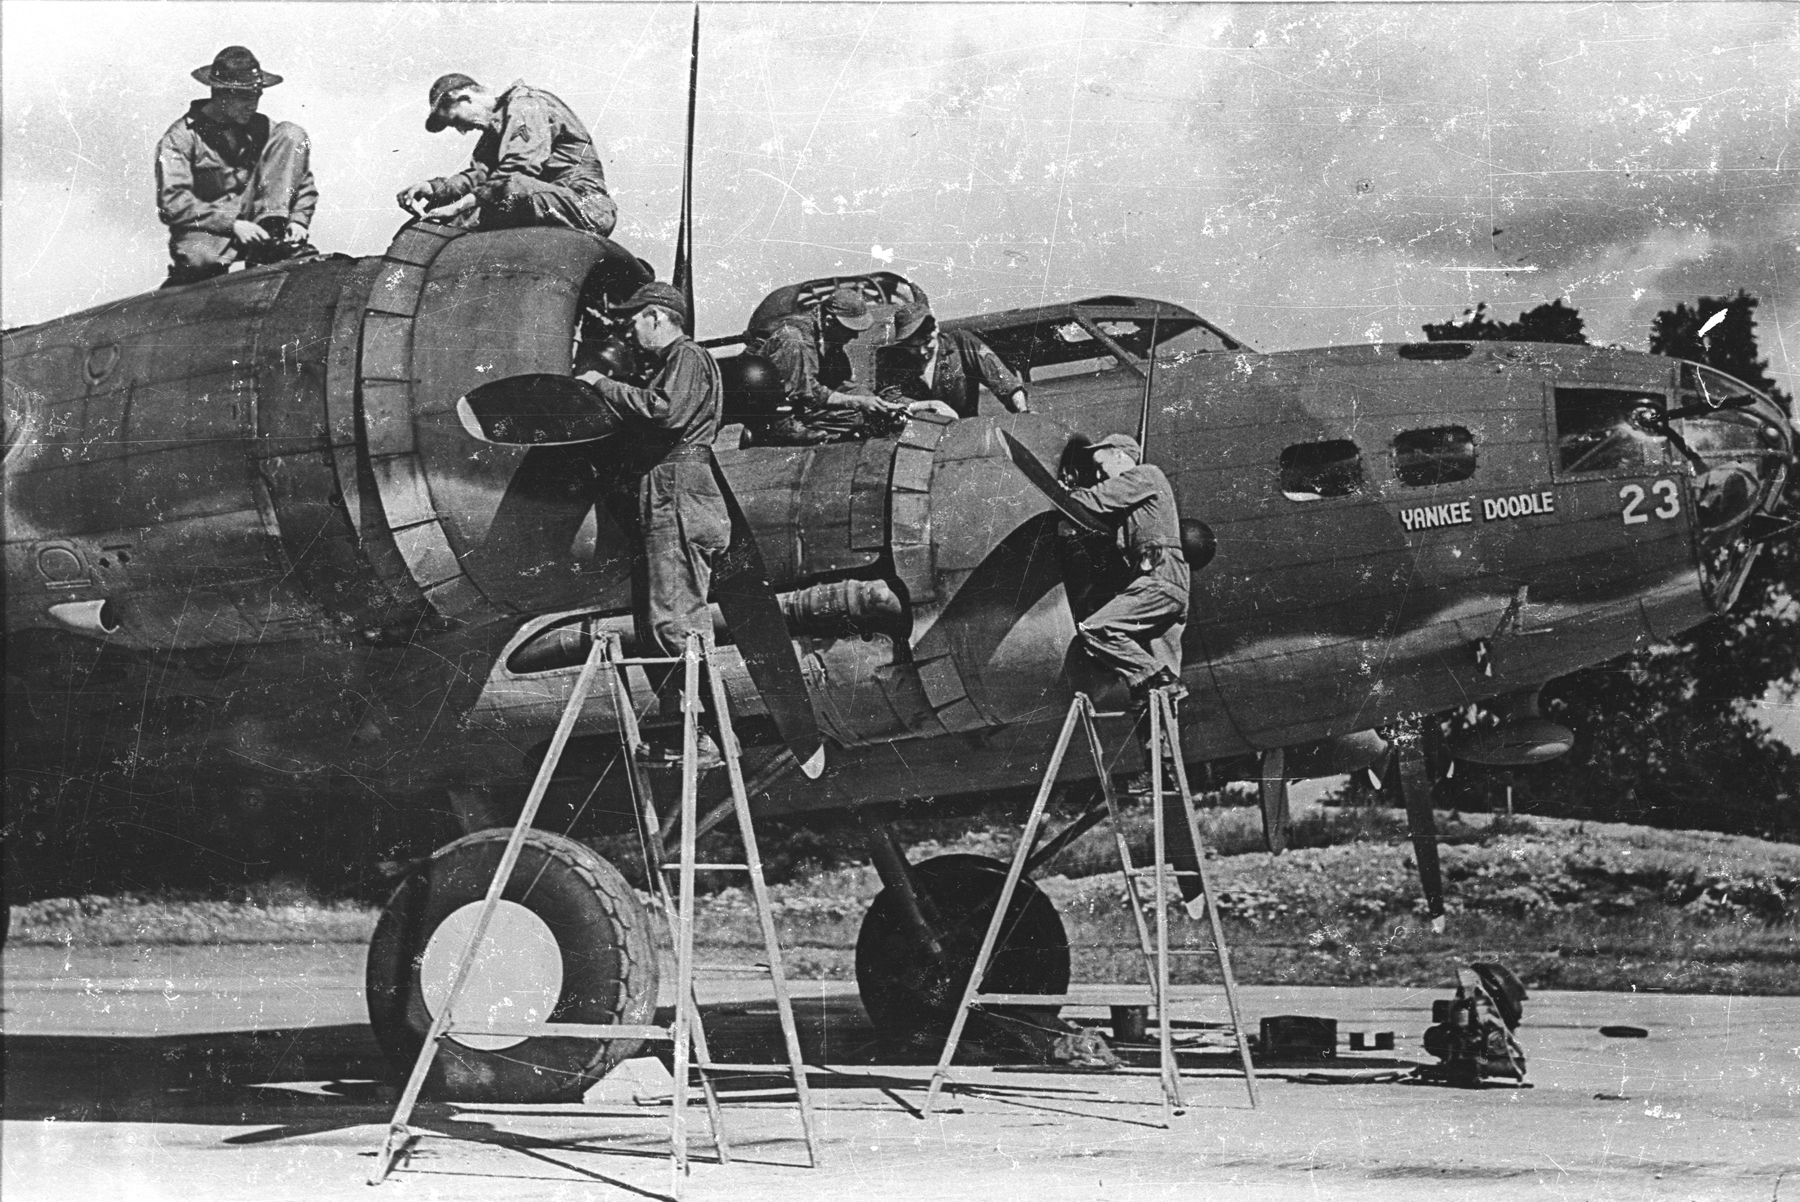 brigadier General Ira C. Eaker commanded the raid from this Boeing B-17E Flying Fortress, 41-9023, Yankee Doodle, here being serviced between missions. (U.S. Air Force)